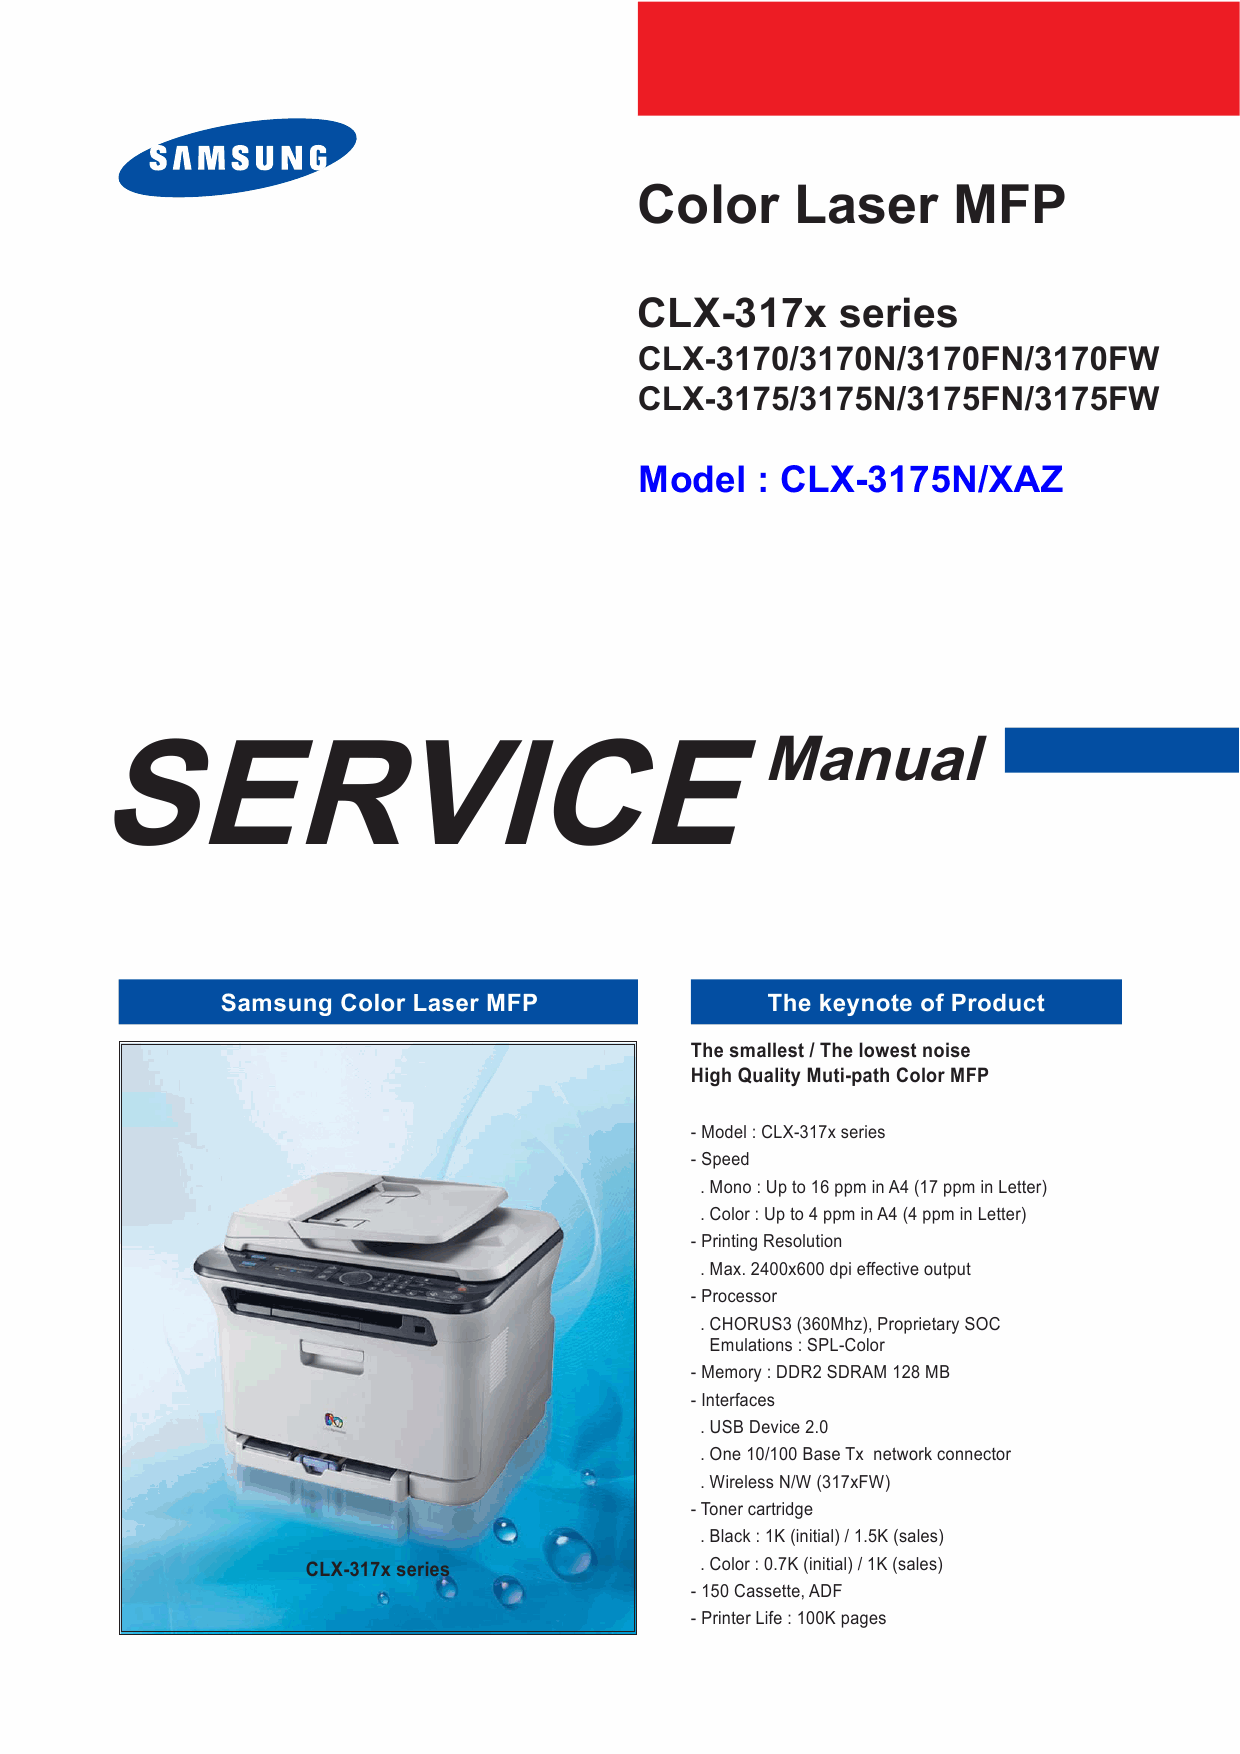 Samsung Digital-Color-Laser-MFP CLX-3170 3175 N FN FW Service and Parts Manual-1